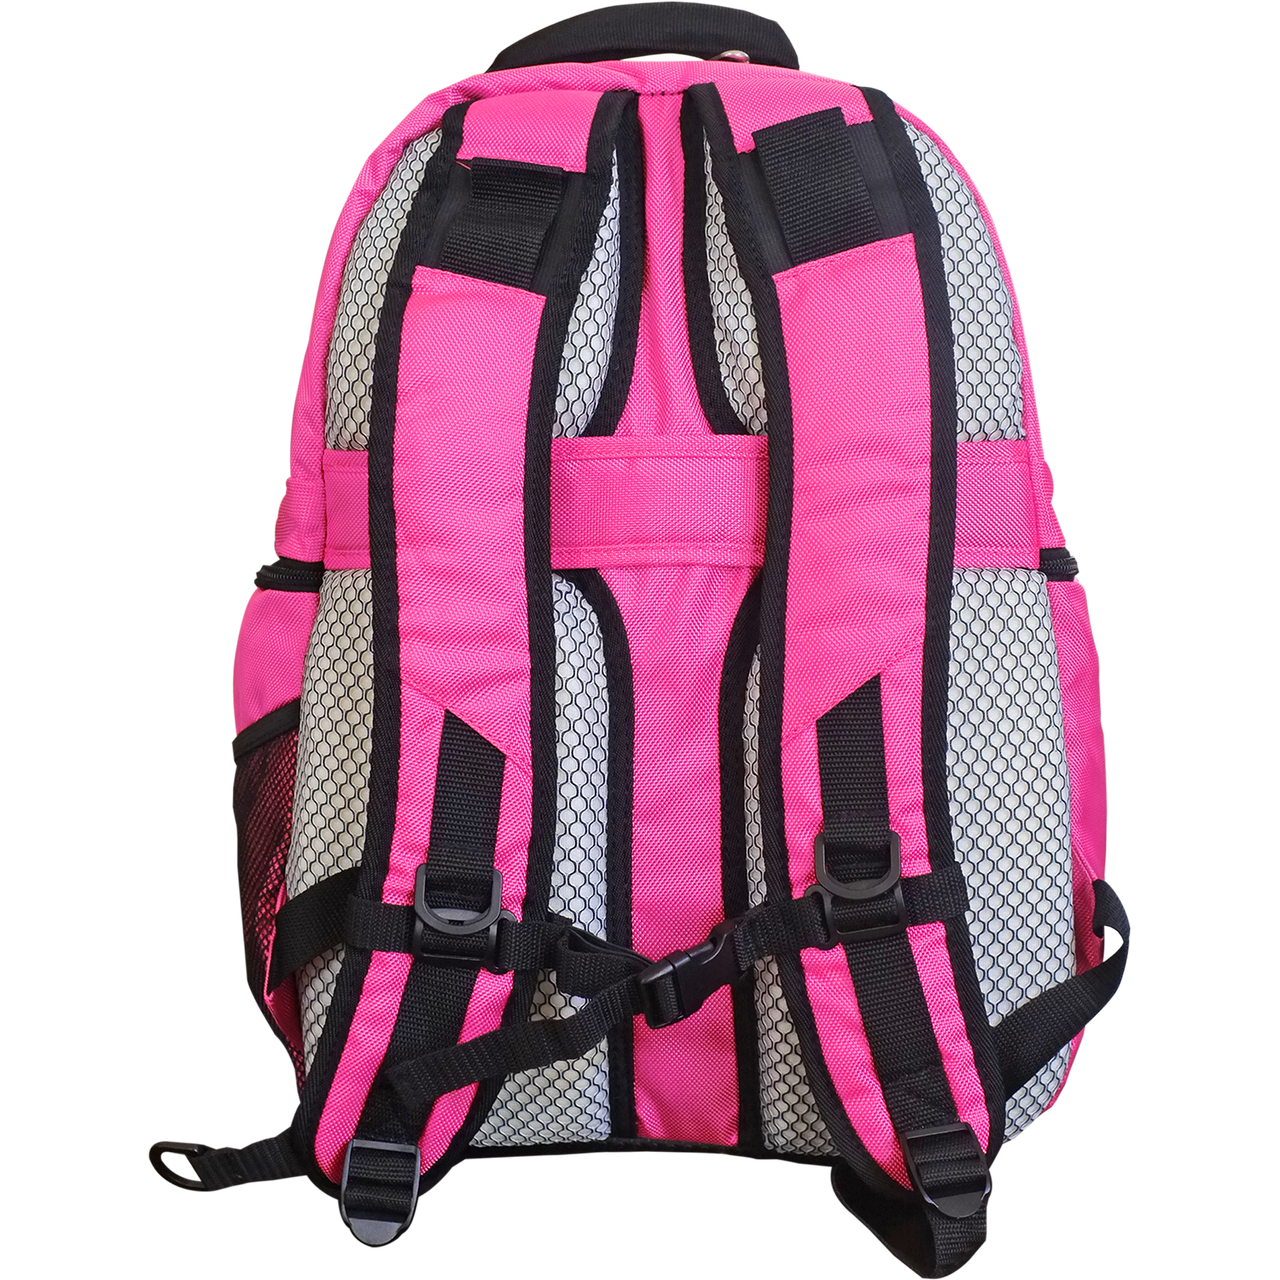 Miami Heat Laptop Backpack Pink